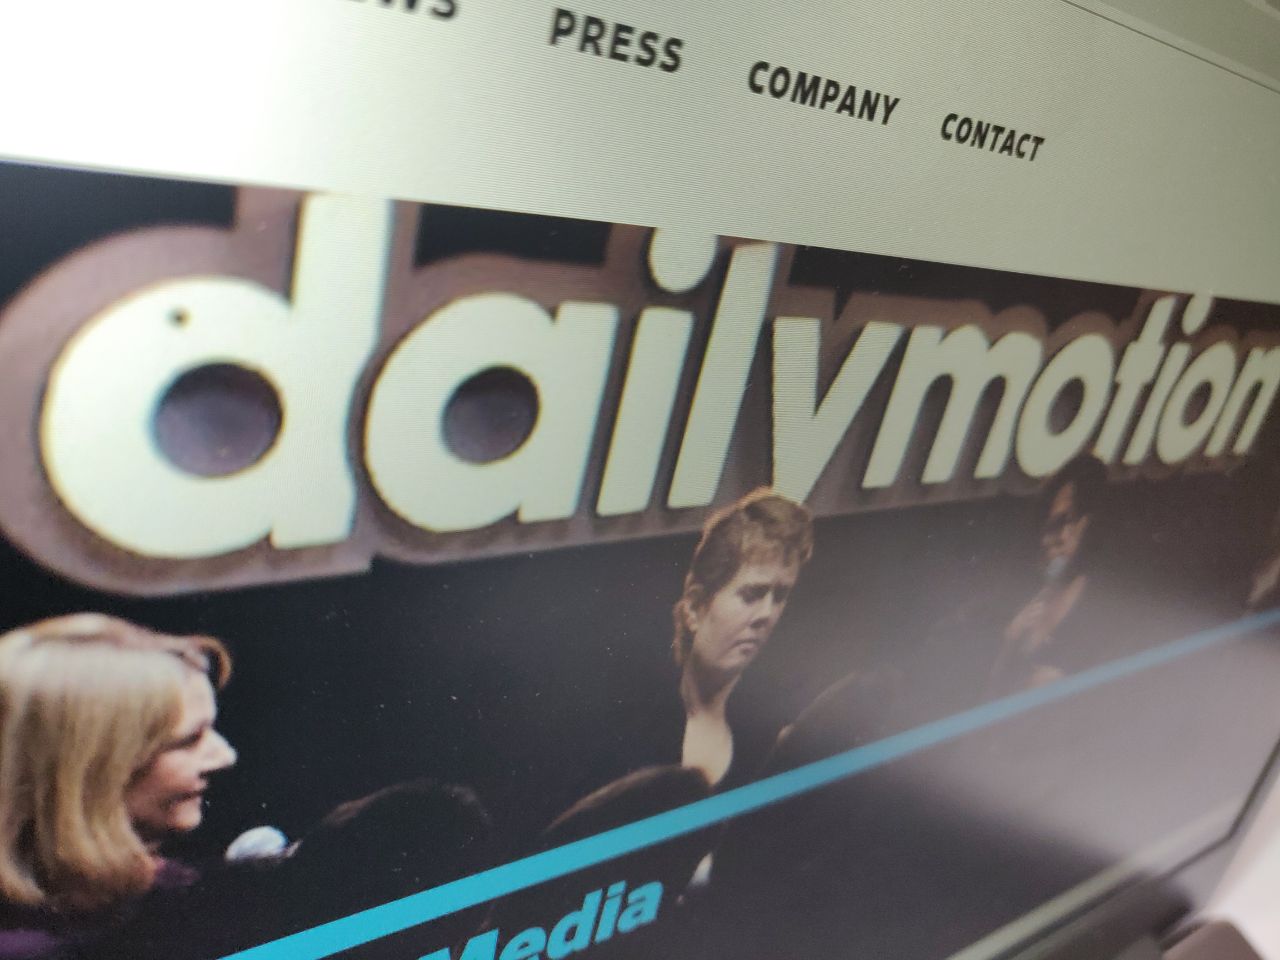 Dailymotion hacked, resets user passwords after being subject to 